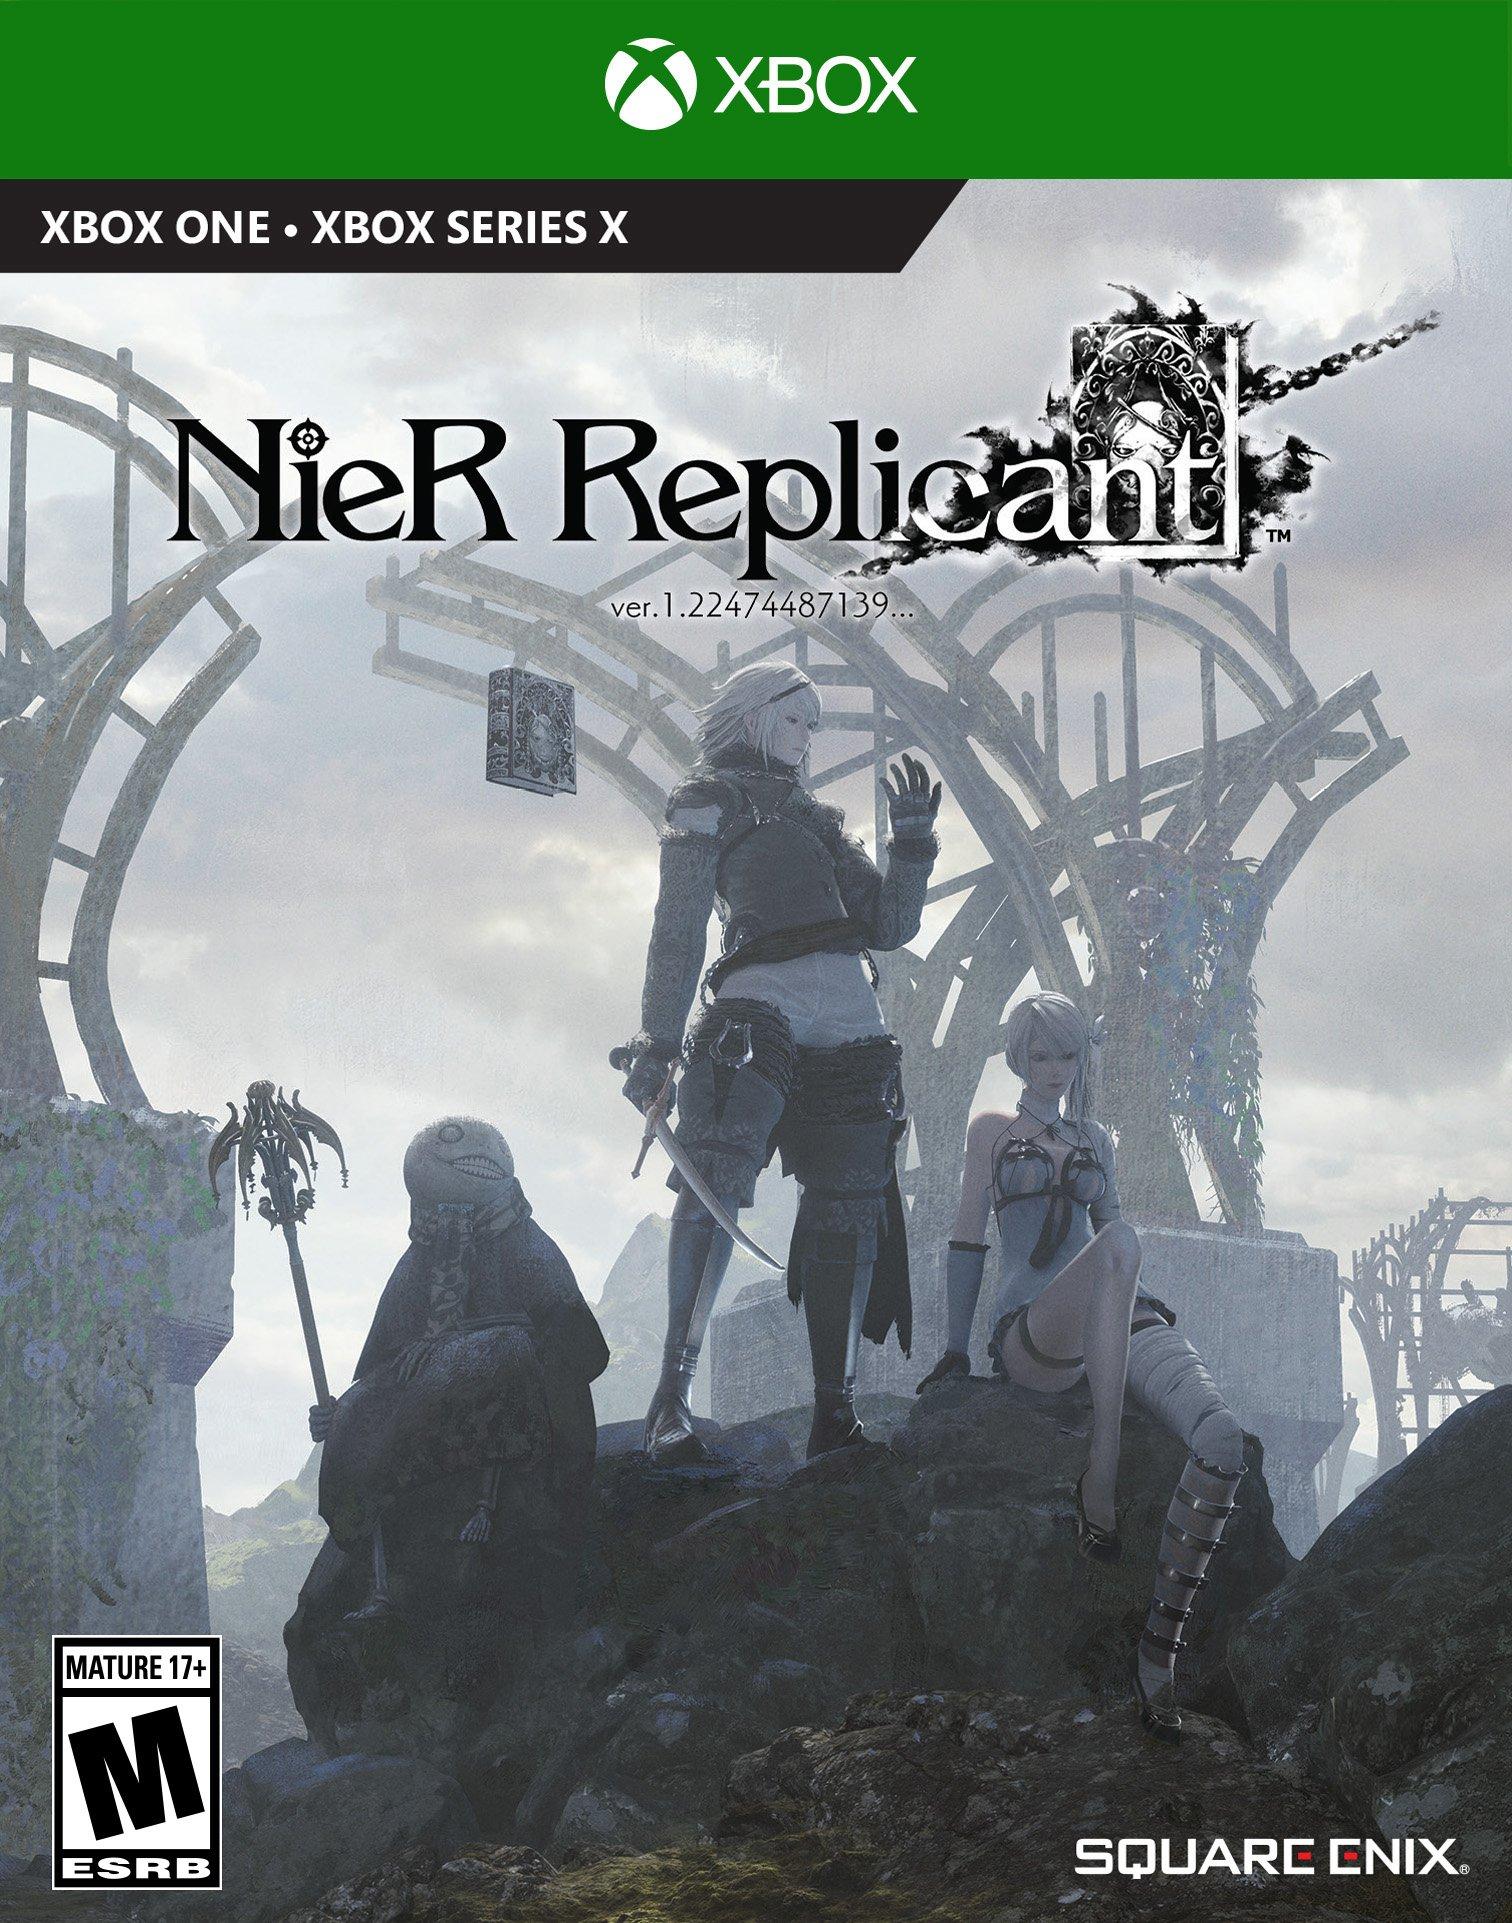 Nier Is Returning To Consoles As Nier Replicant Ver. 1.22474487139 -  GameSpot